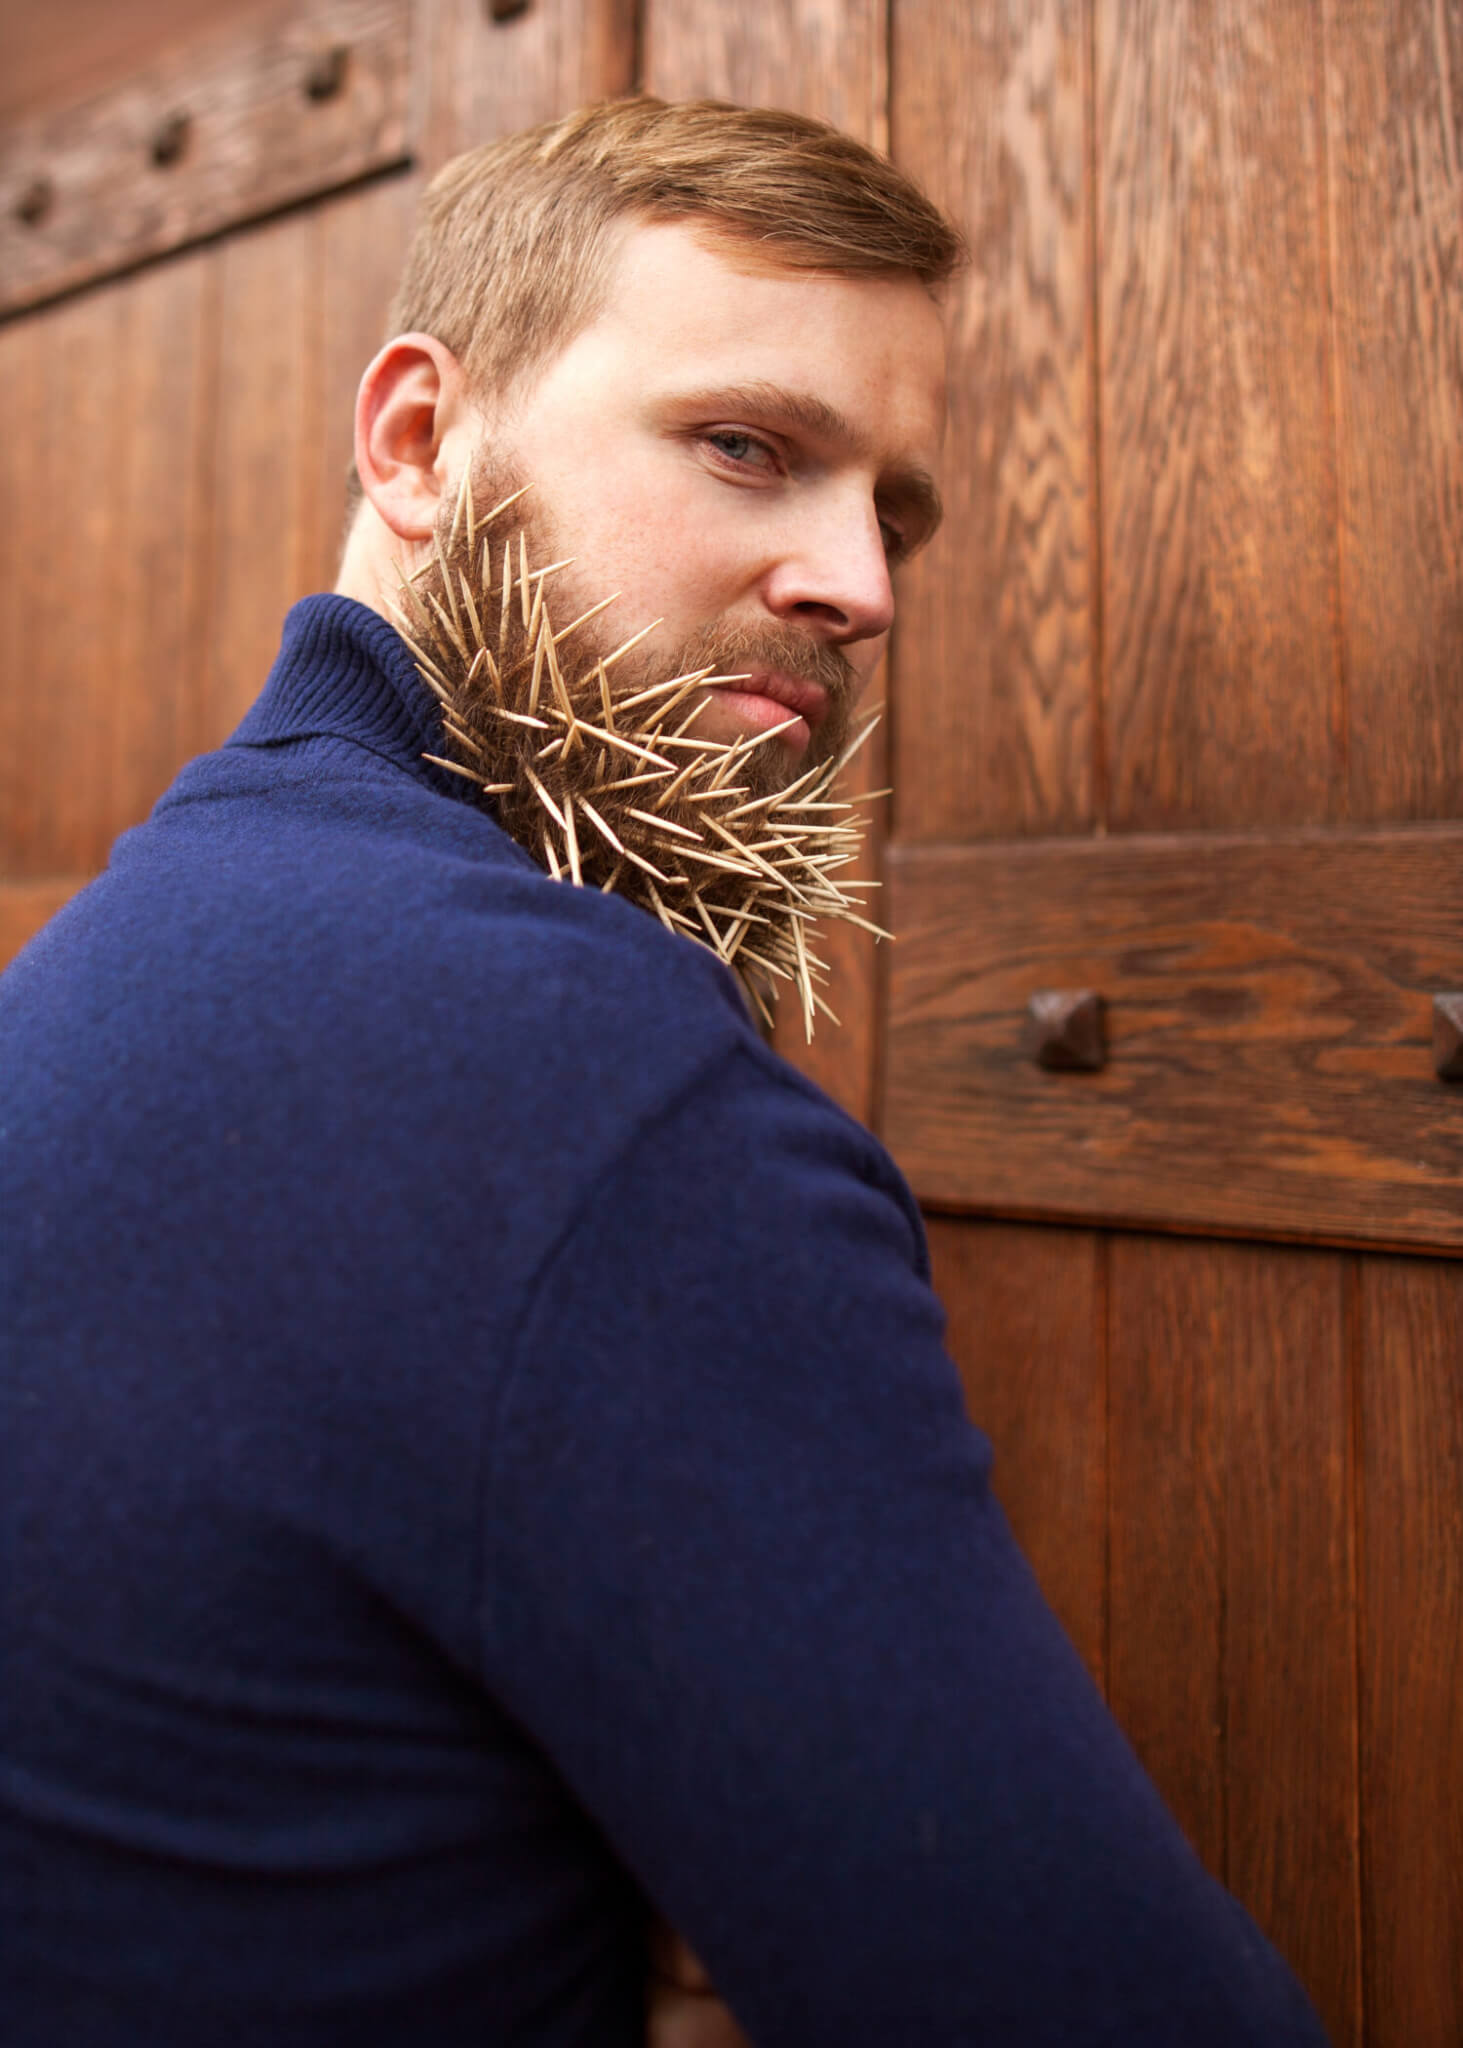 fashion hipster guy standing near a wooden door toothpicks in his beard, hatred, anger, contempt, deceit, greed.